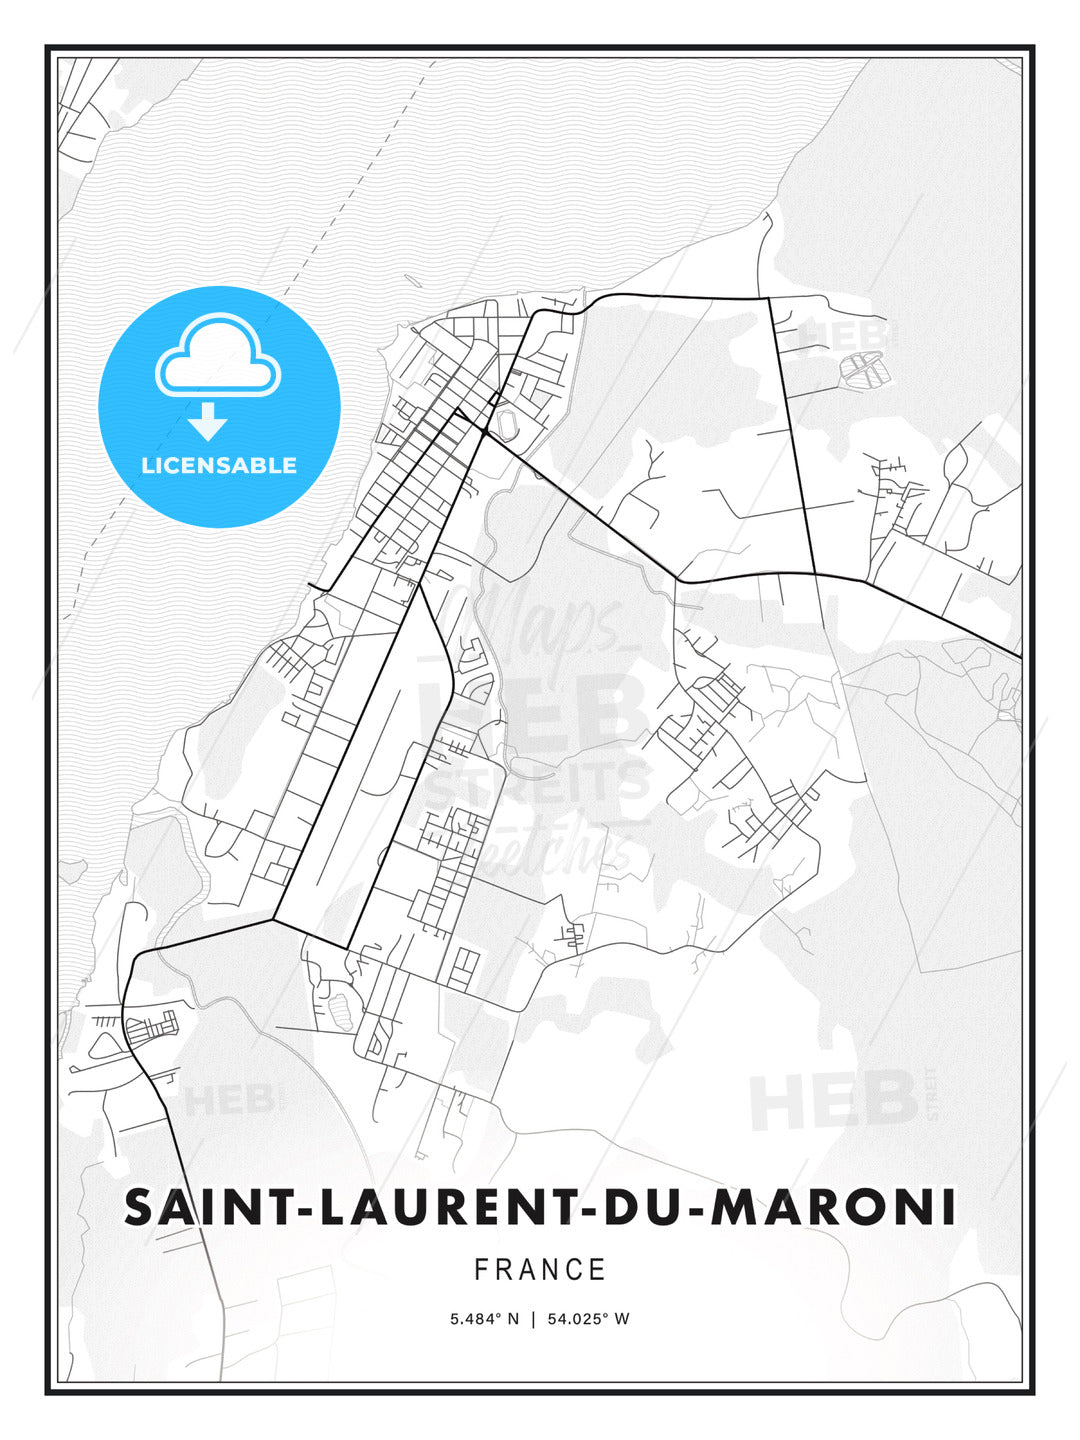 Saint-Laurent-du-Maroni, France, Modern Print Template in Various Formats - HEBSTREITS Sketches